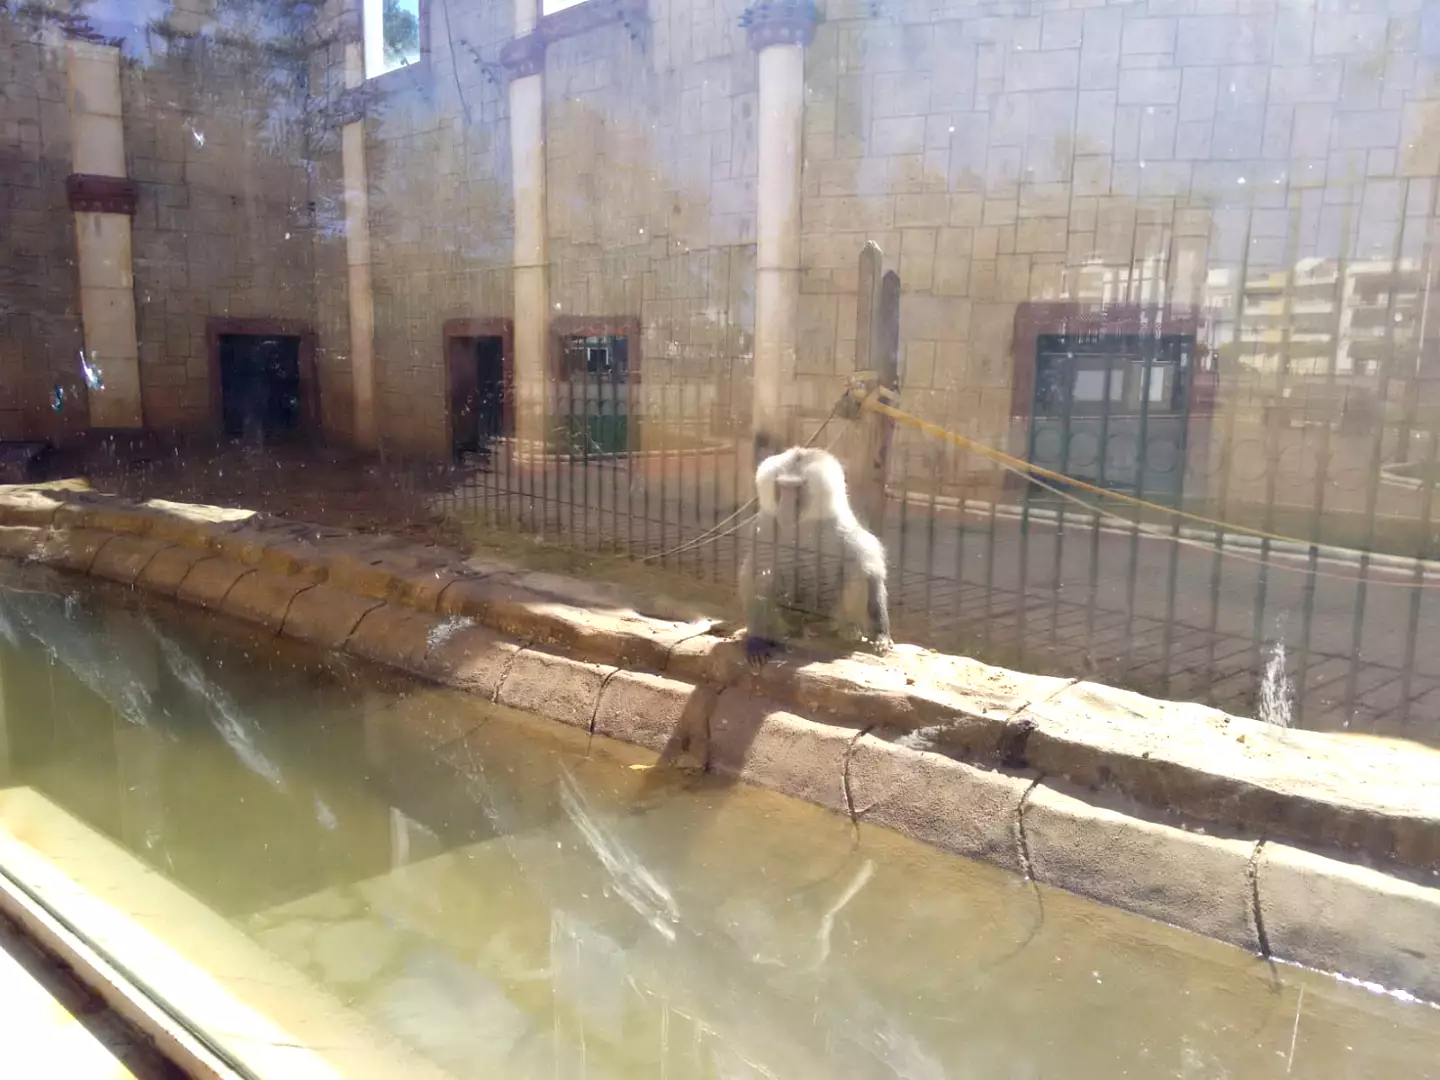 The zoo reportedly closed following a number of deaths and complaints from activists.